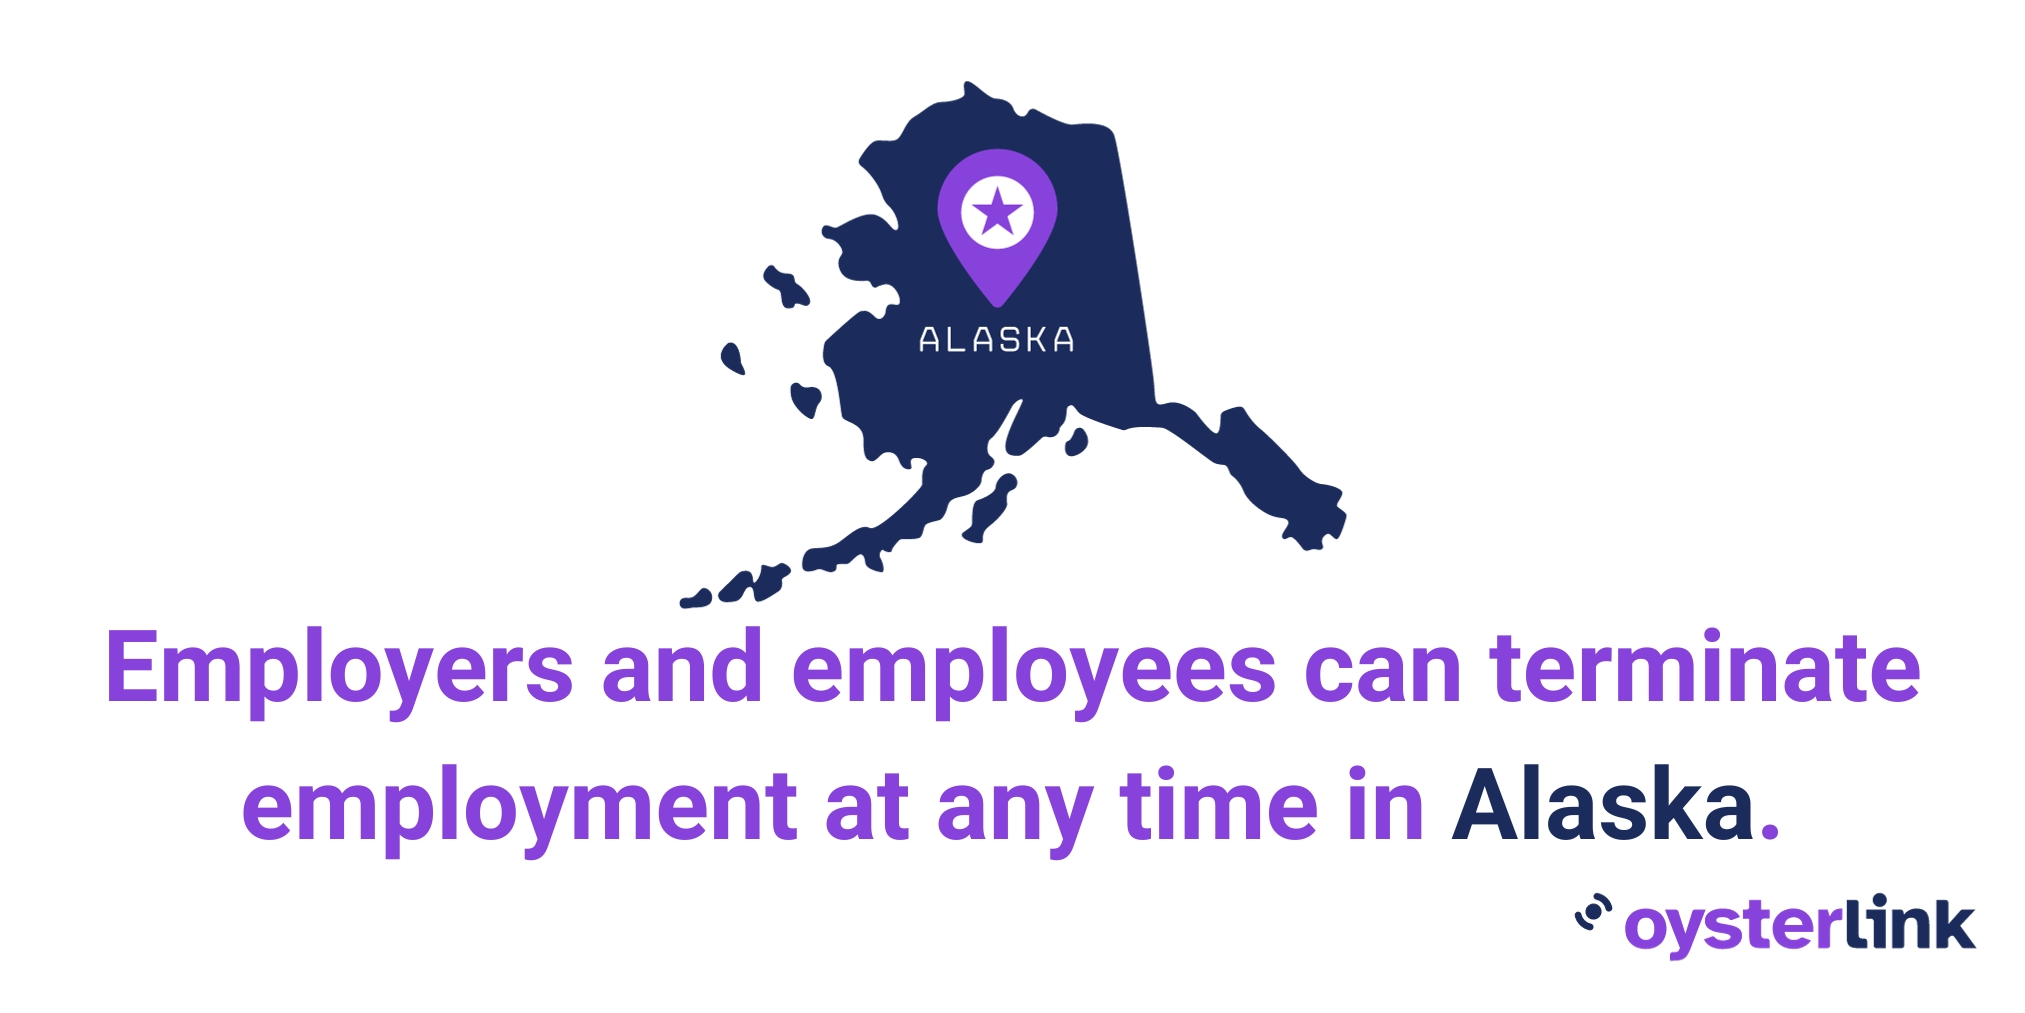 A map of Alaska showing at will employment